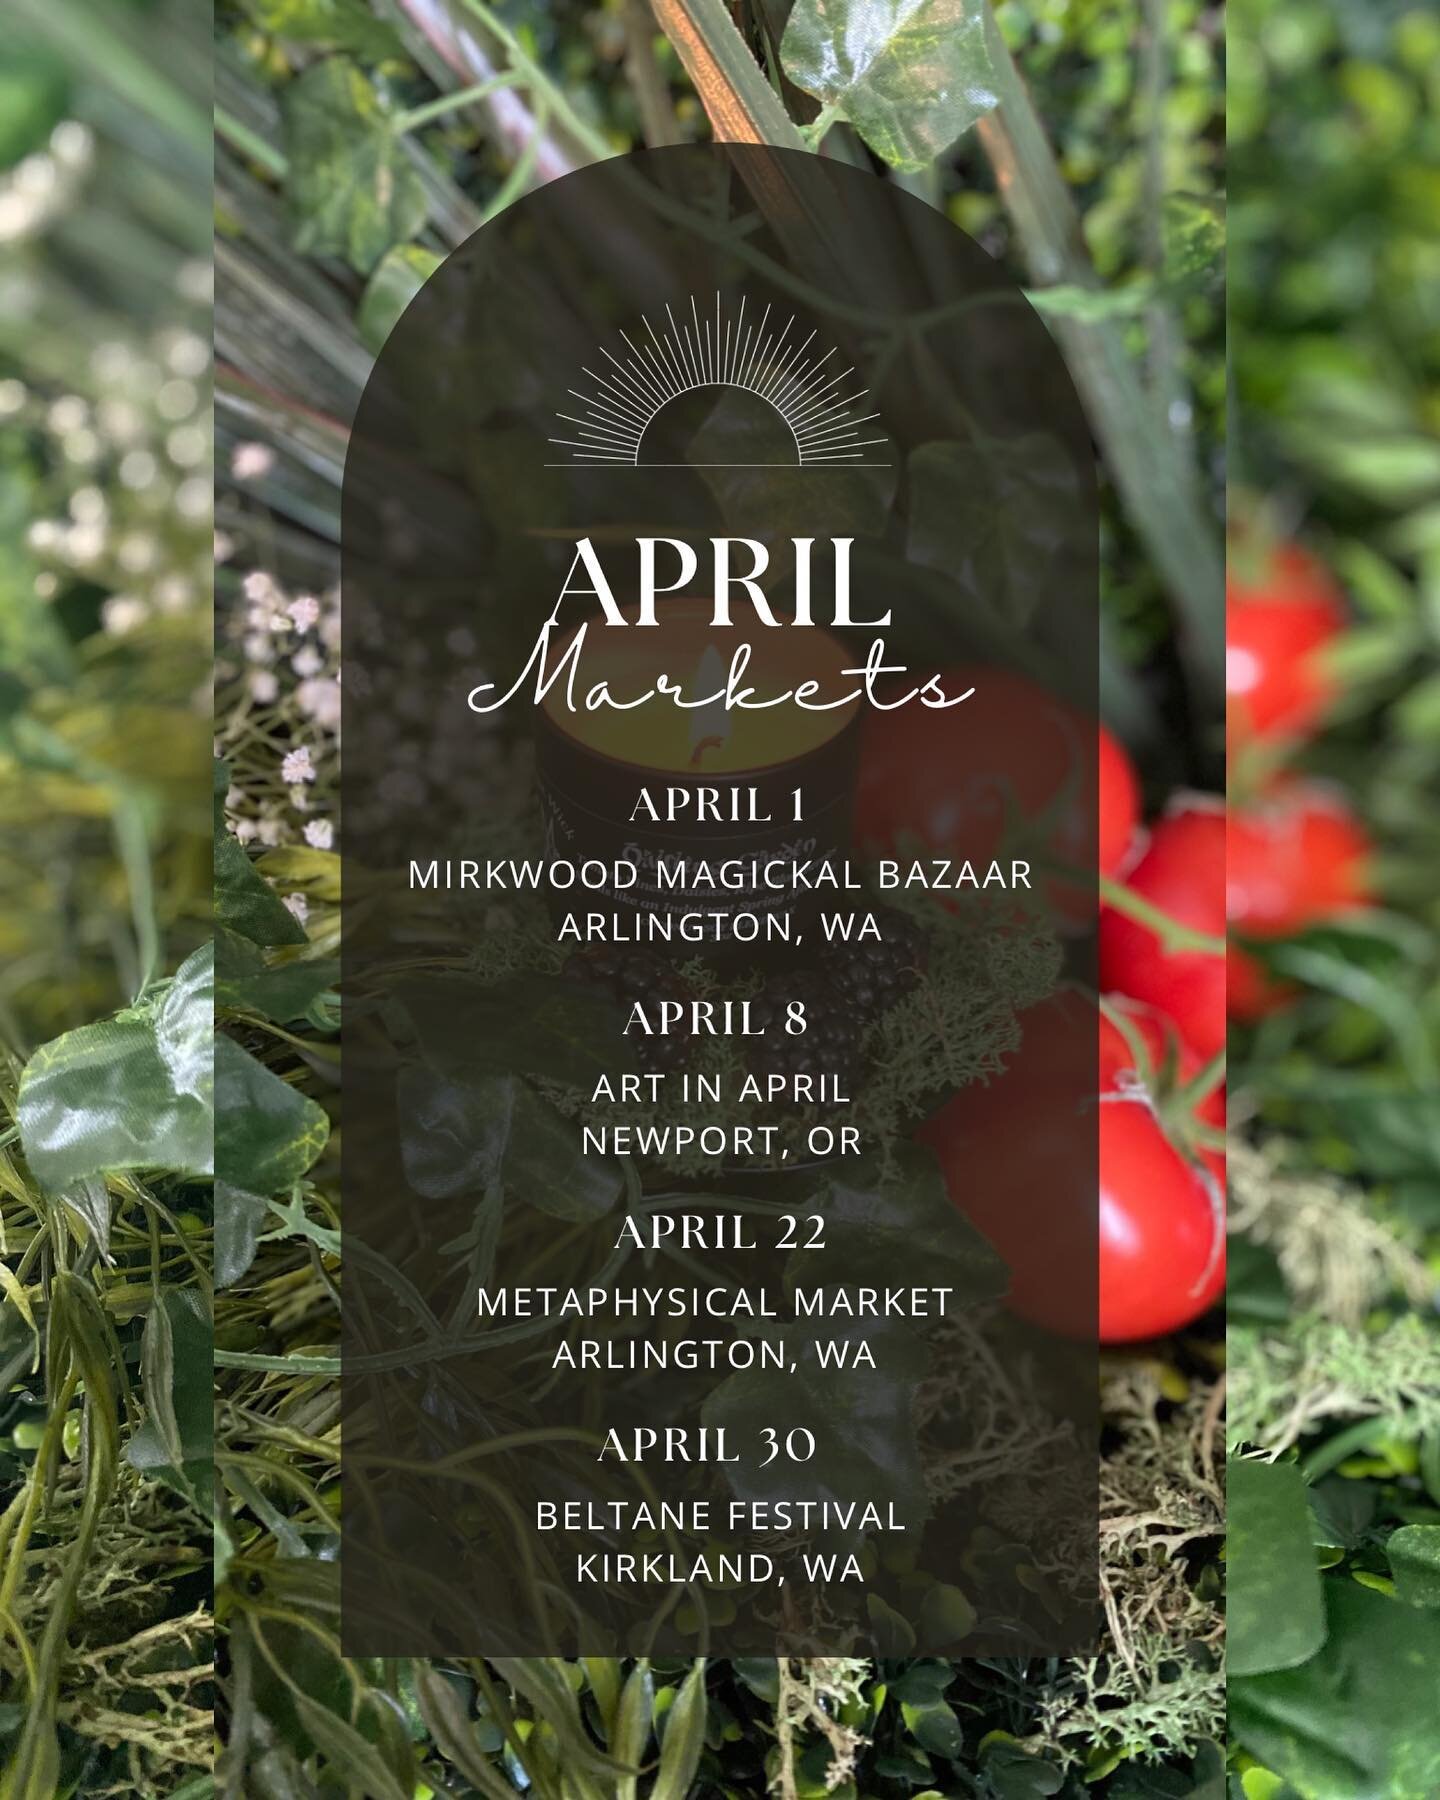 Mark your calendars for my upcoming April markets! For the first time I&rsquo;ll be doing an event in Oregon.

April 1 - the Mirkwood Magickal Bazaar in Arlington, WA

April 8 - Art in April in Newport, OR

April 22 - Metaphysical Market in Arlington